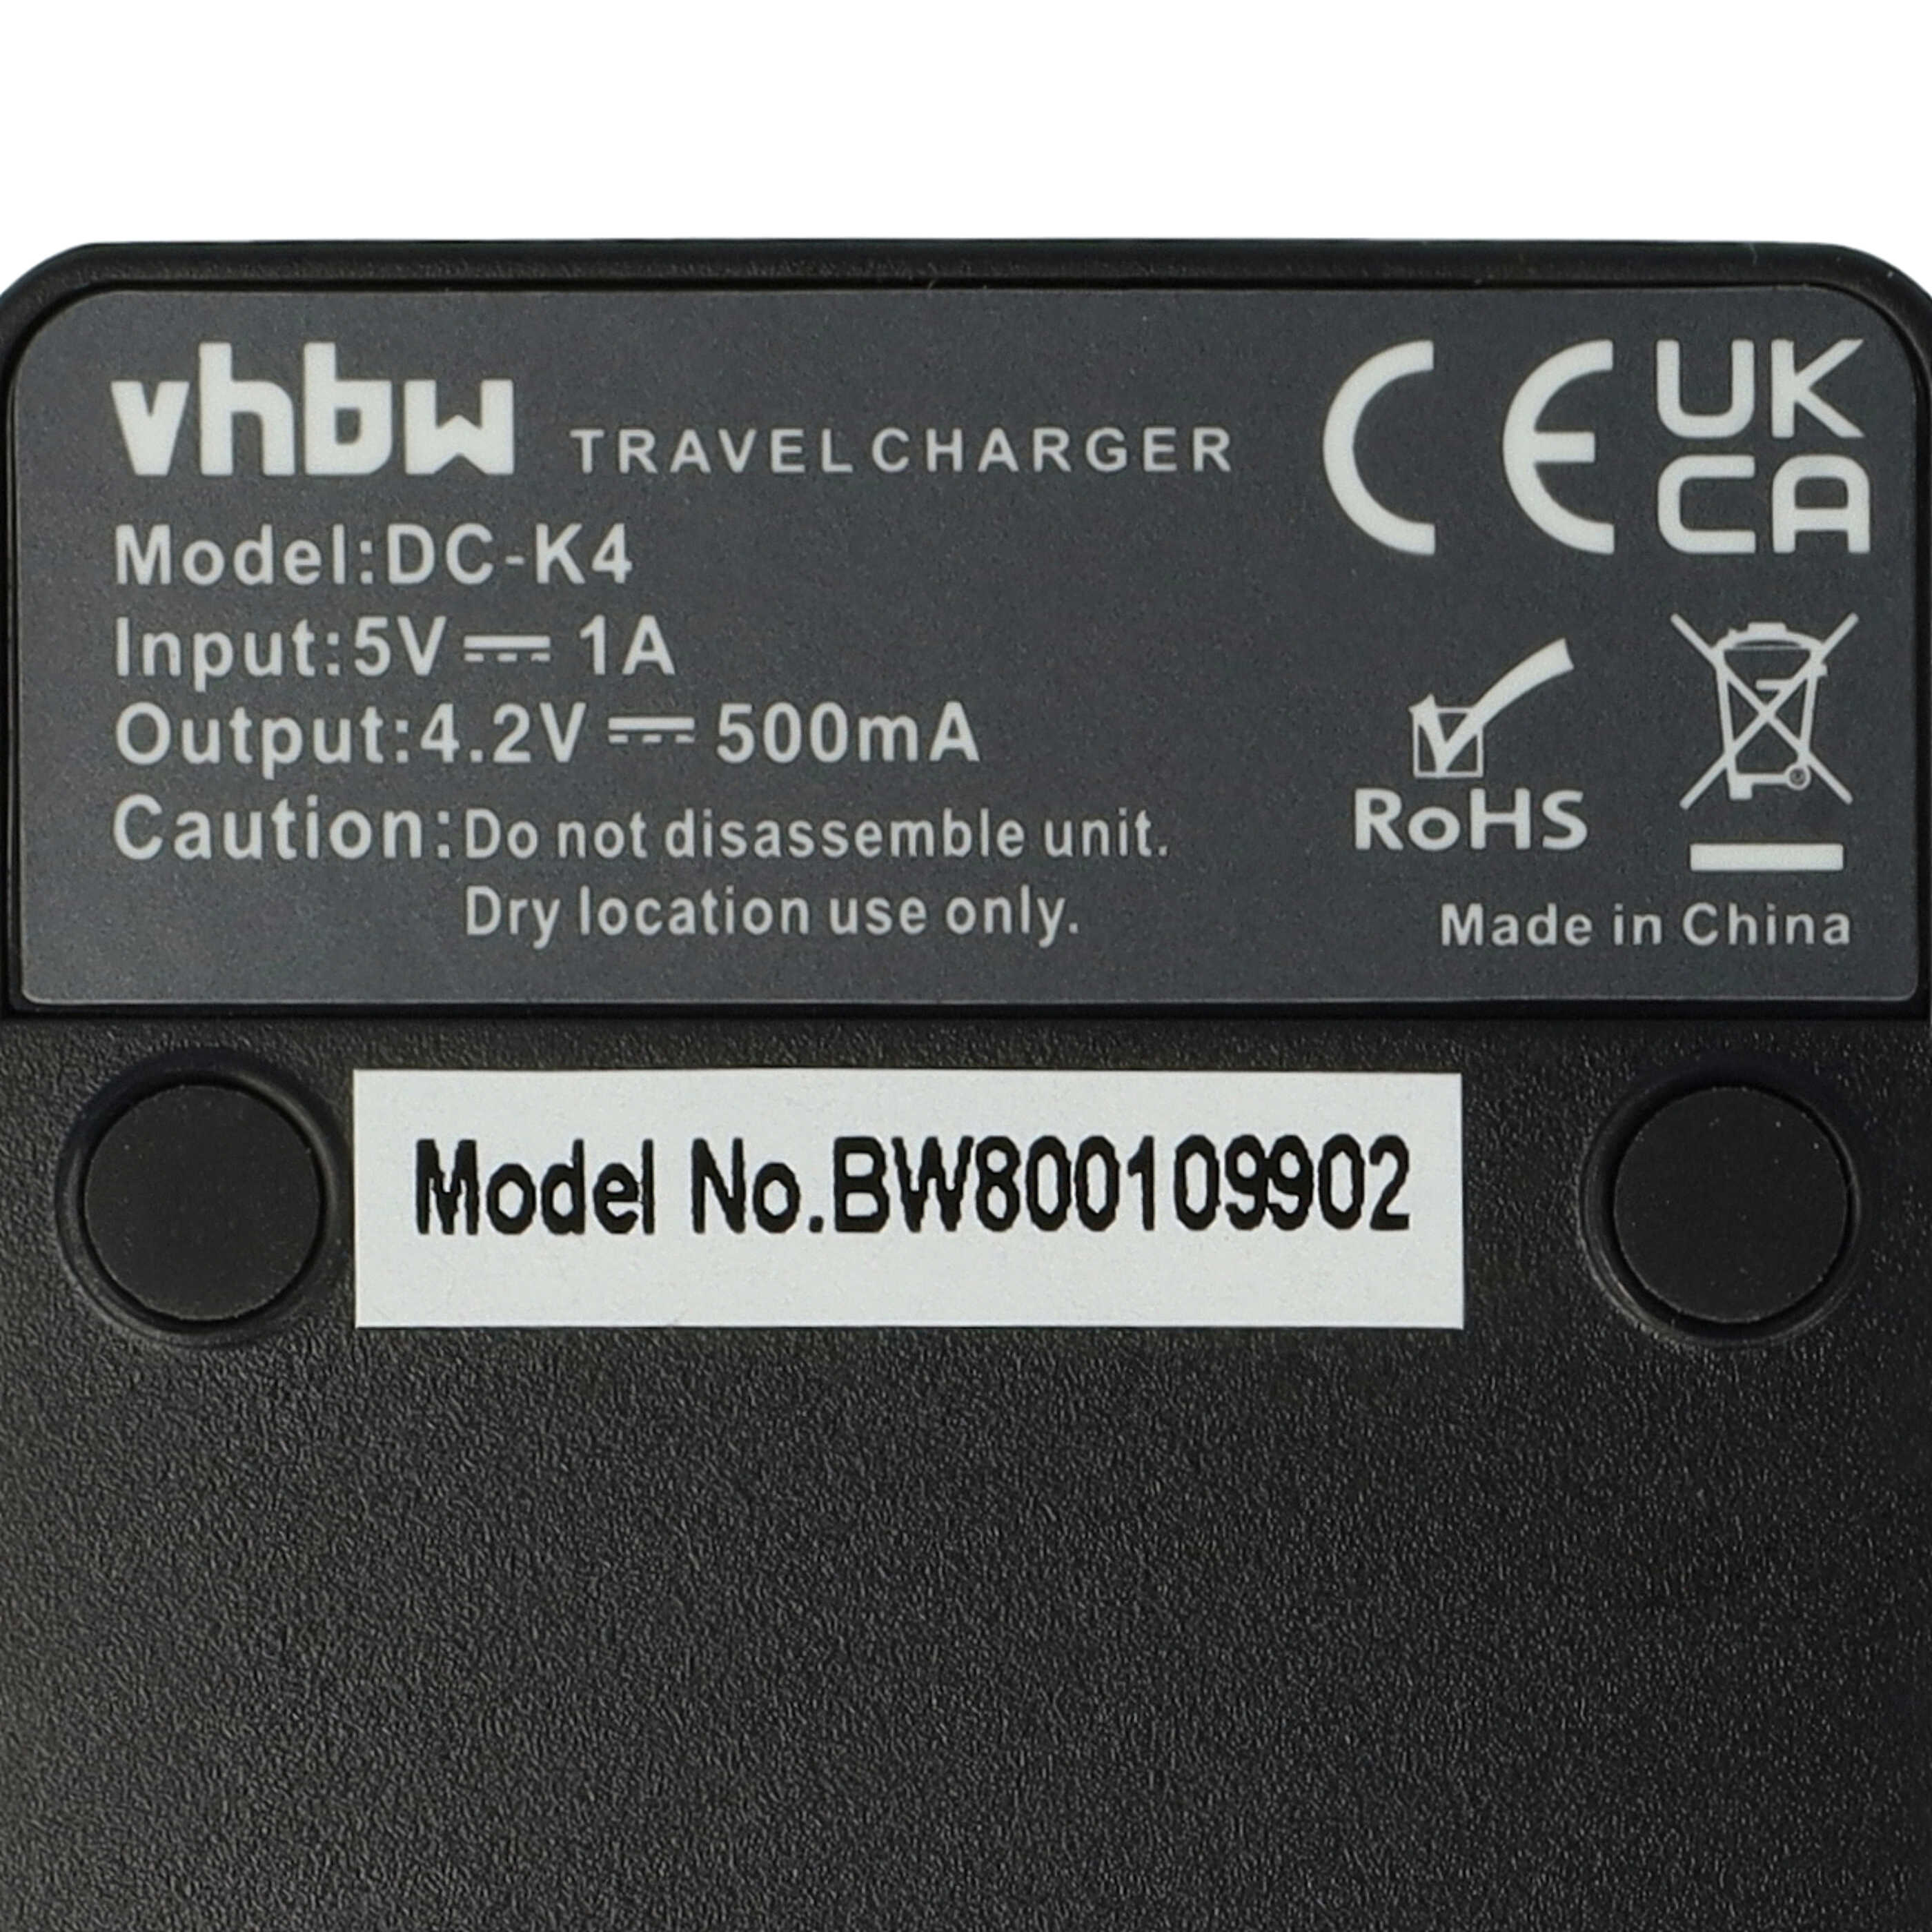 Battery Charger suitable for Canon NB-11L Camera etc. - 0.5 A, 4.2 V